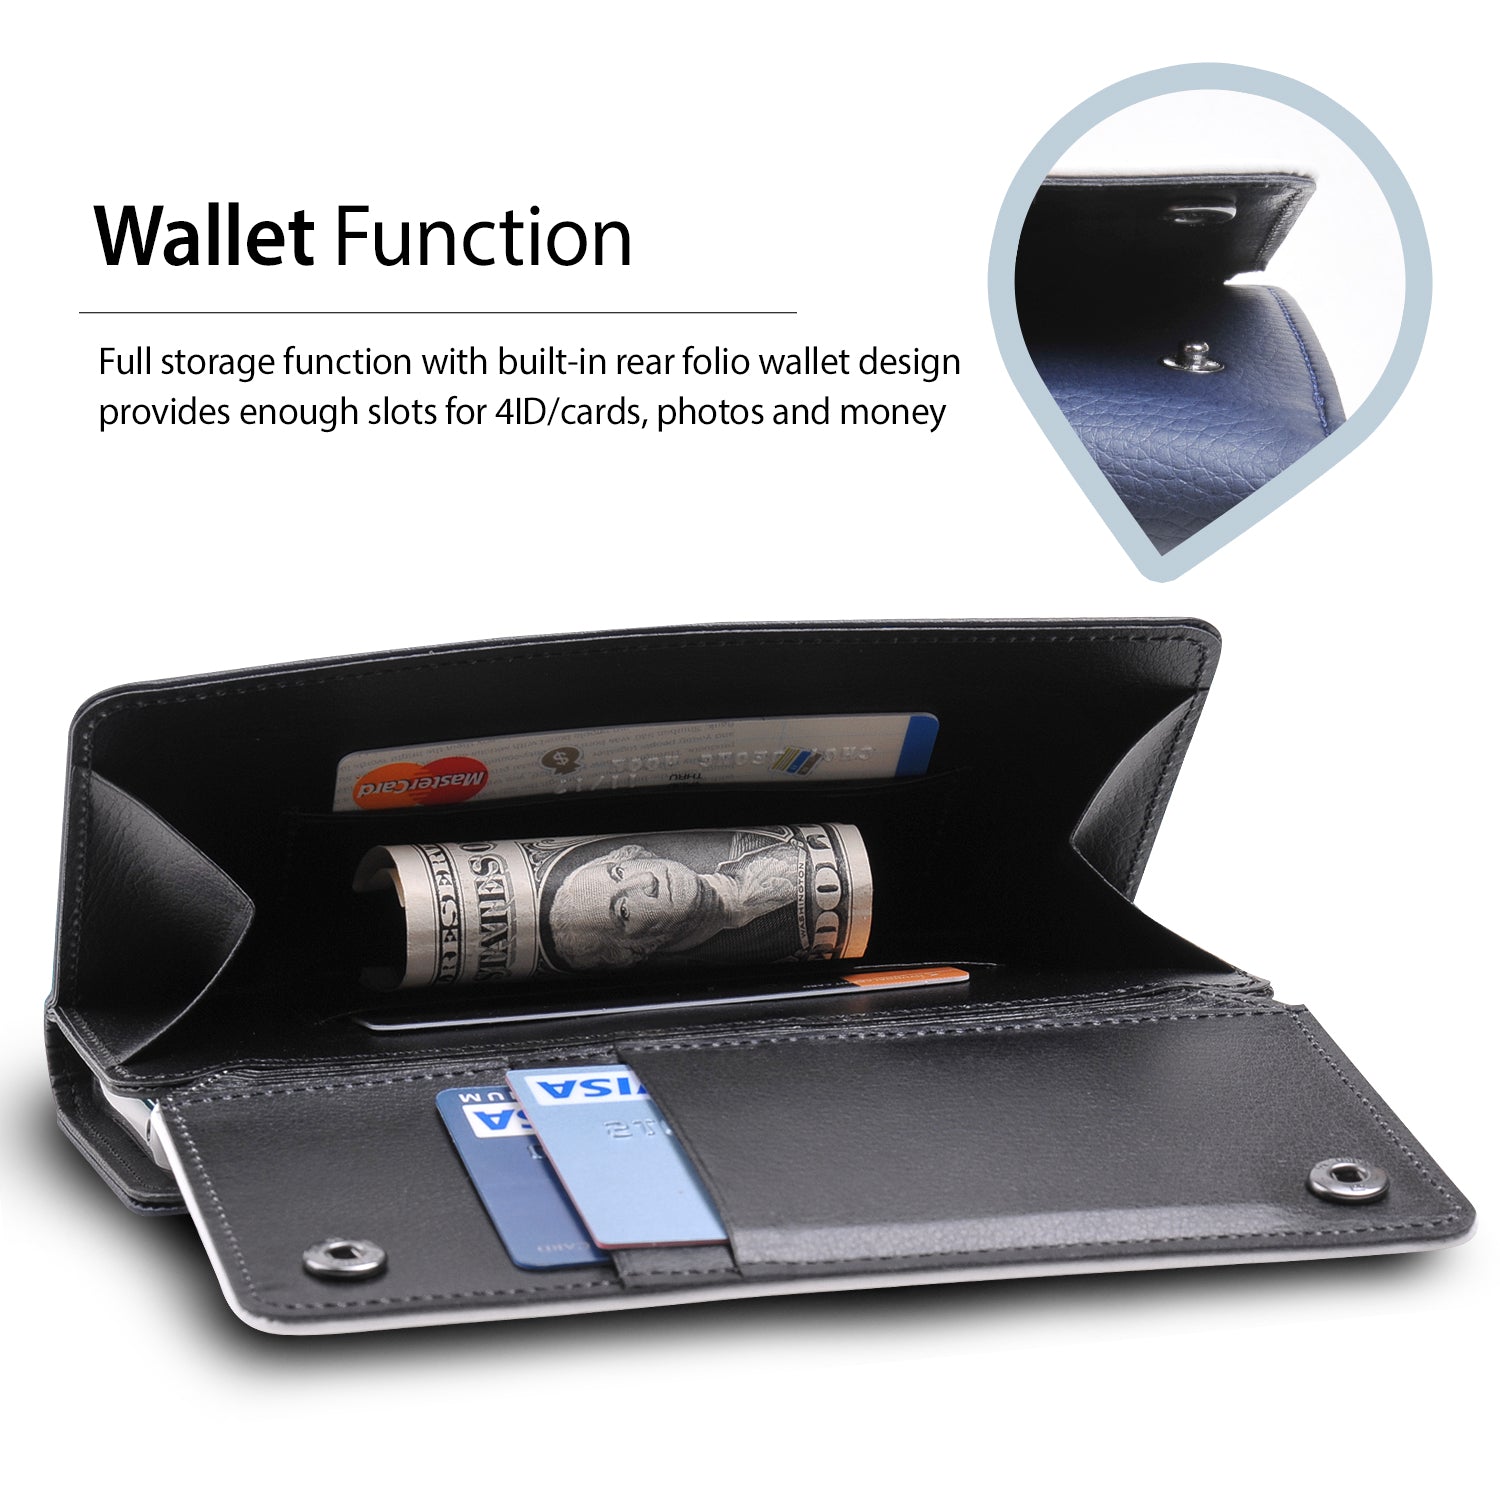 iPhone 7 Case | Wallet - Wallet Function. Full storage function with buil-in rear folio wallet design provides enough slots for 4 IDs/Cards. photos and money